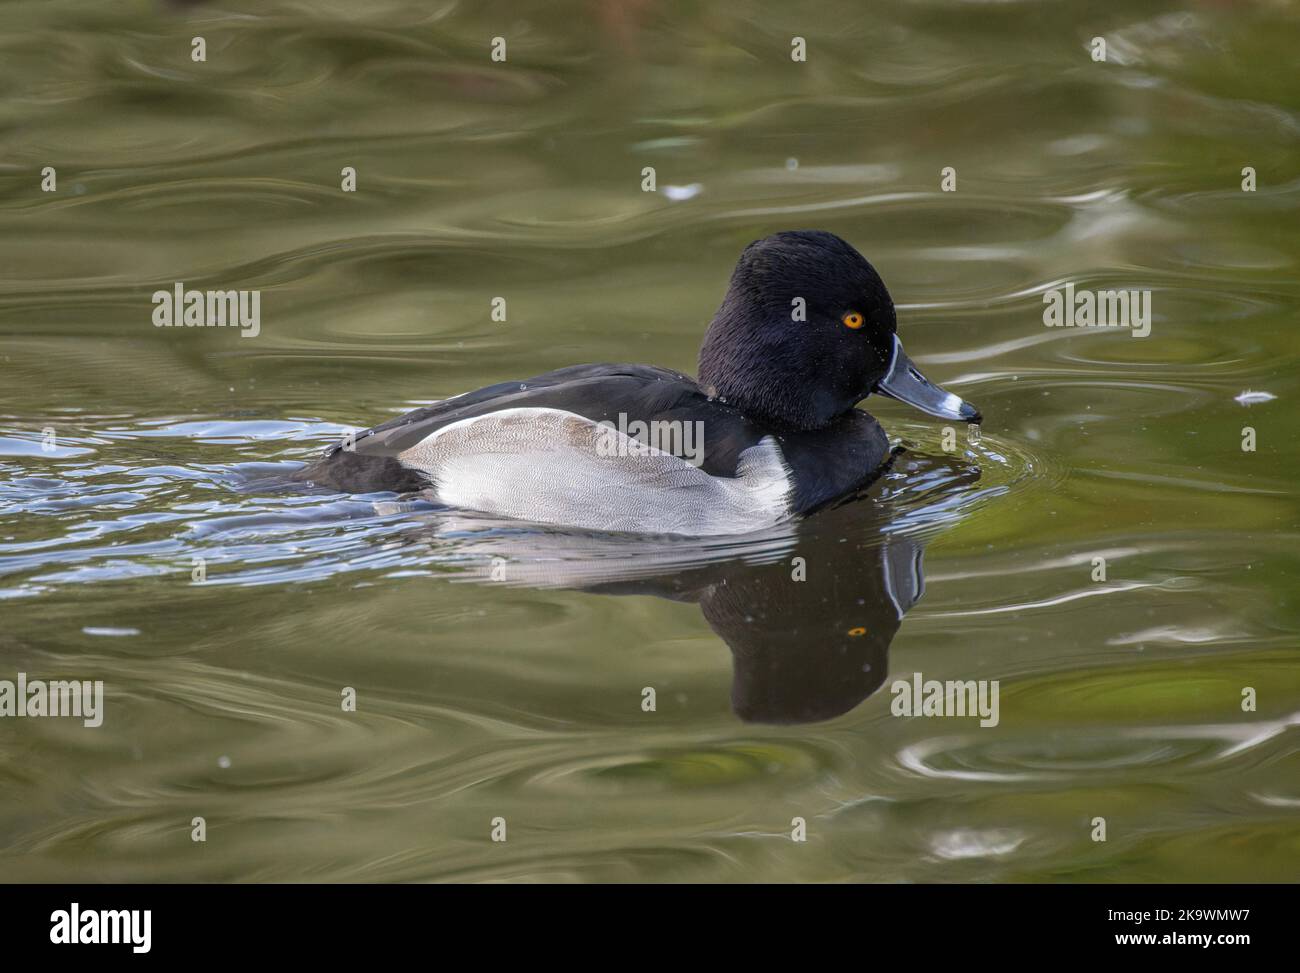 Male Ring-necked duck, Aythya collaris, swimming on lake in autumn. Stock Photo